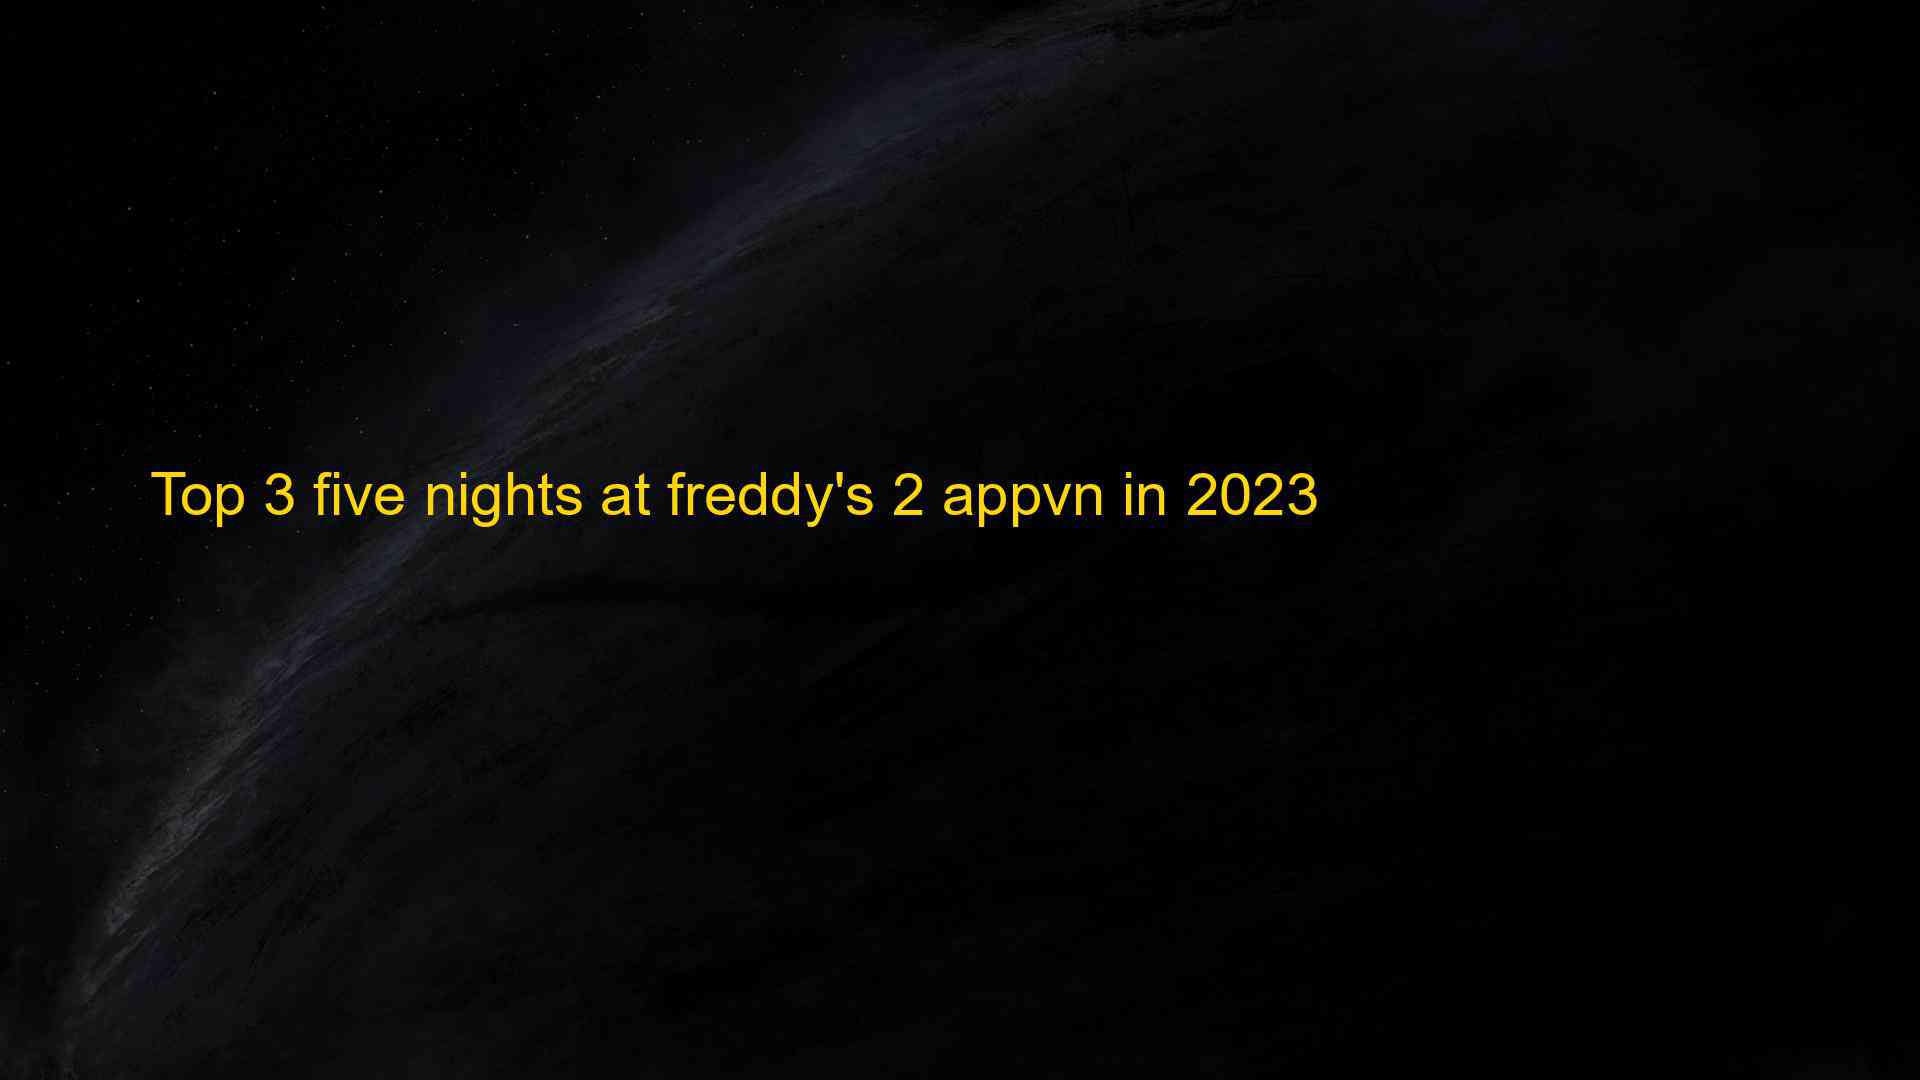 Top 3 Five Nights At Freddys 2 Appvn In 2023 1684747066 